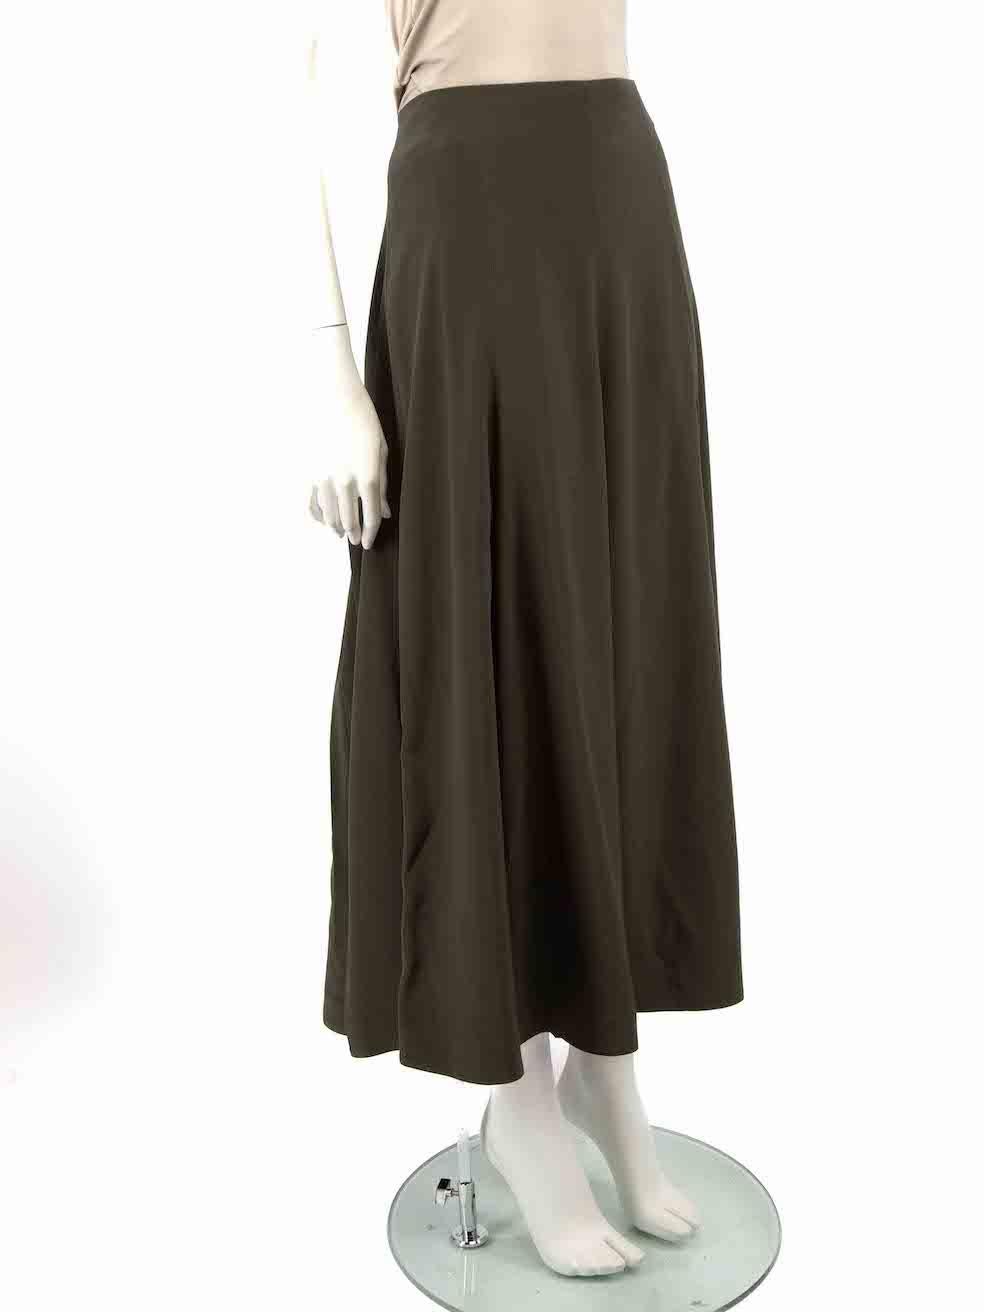 CONDITION is Very good. Minimal wear to skirt is evident. Minimal wear to the rear with light marks on this used CO designer resale item.
 
 Details
 F/W20
 Green
 Synthetic
 Pleated skirt
 Midi length
 Side zip closure with hook and eye
 
 
 Made